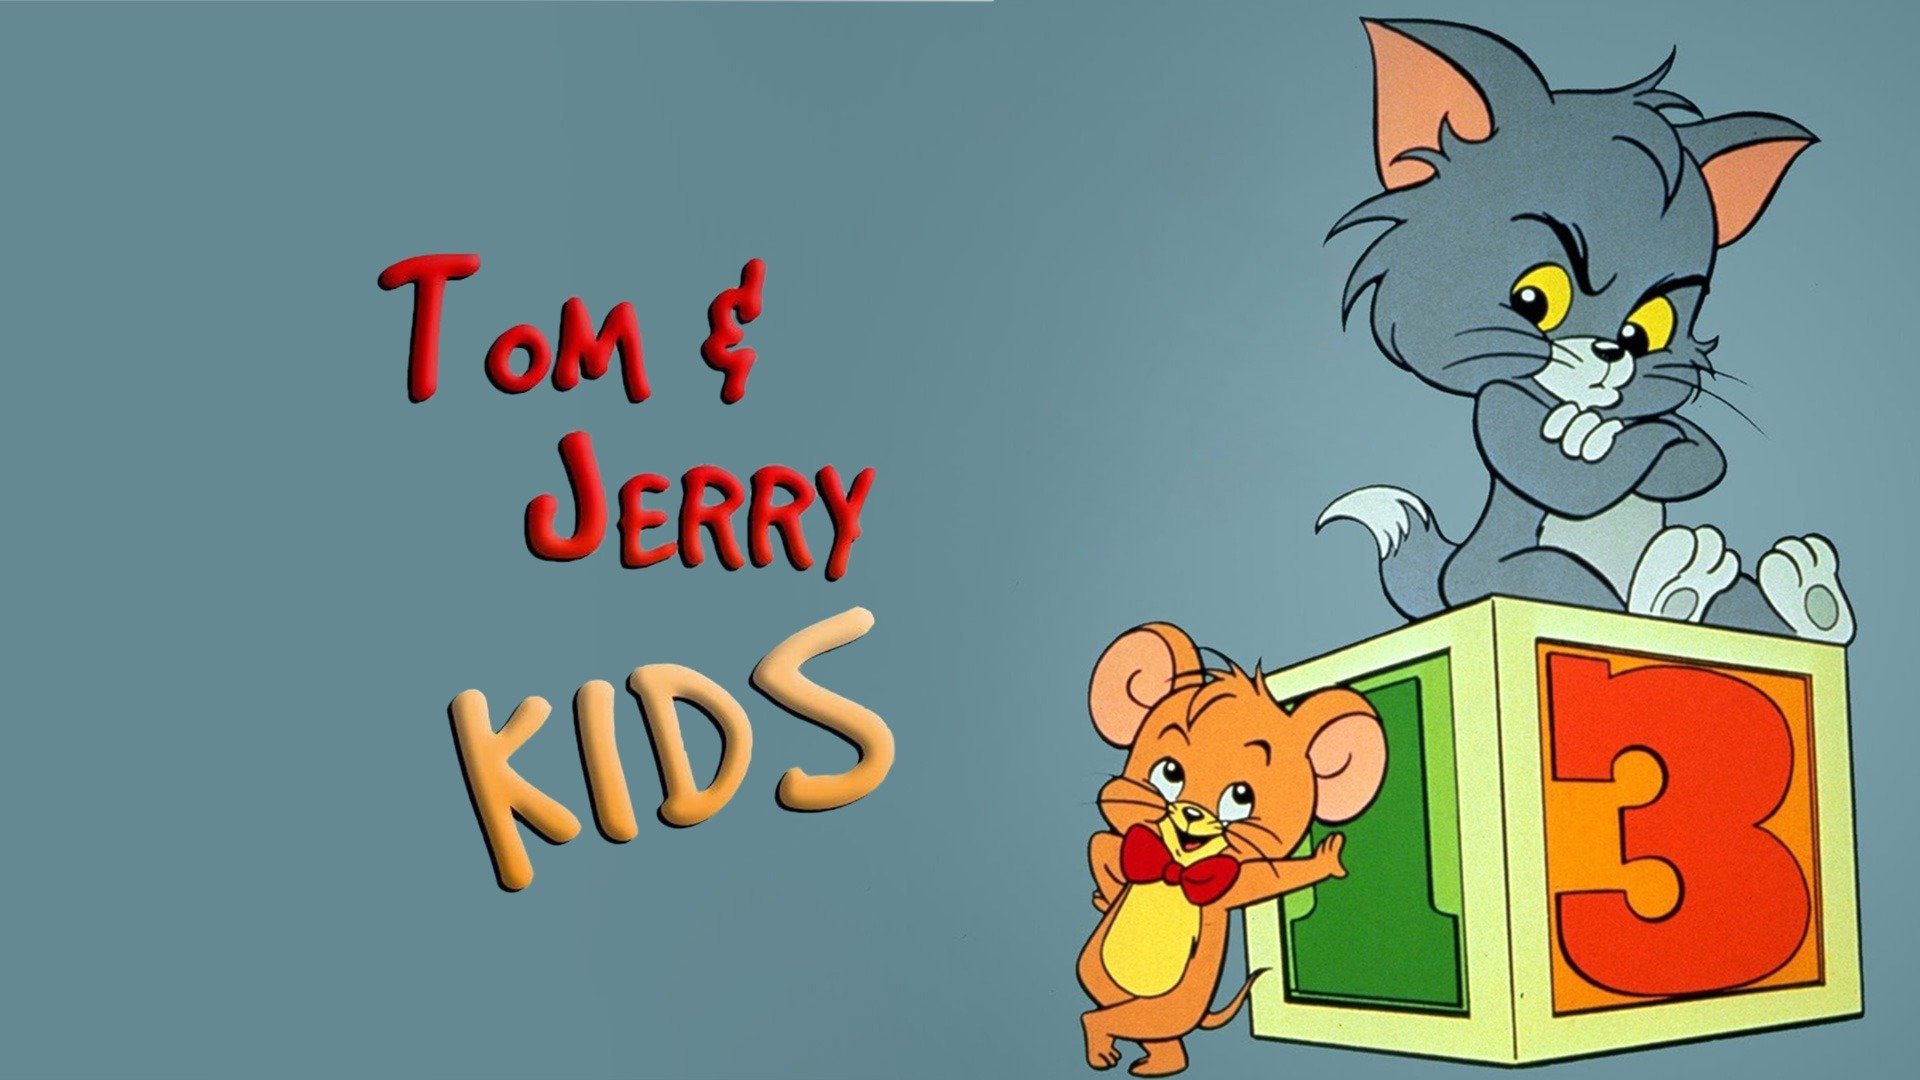 Tom & Jerry Kids - Rotten Tomatoes